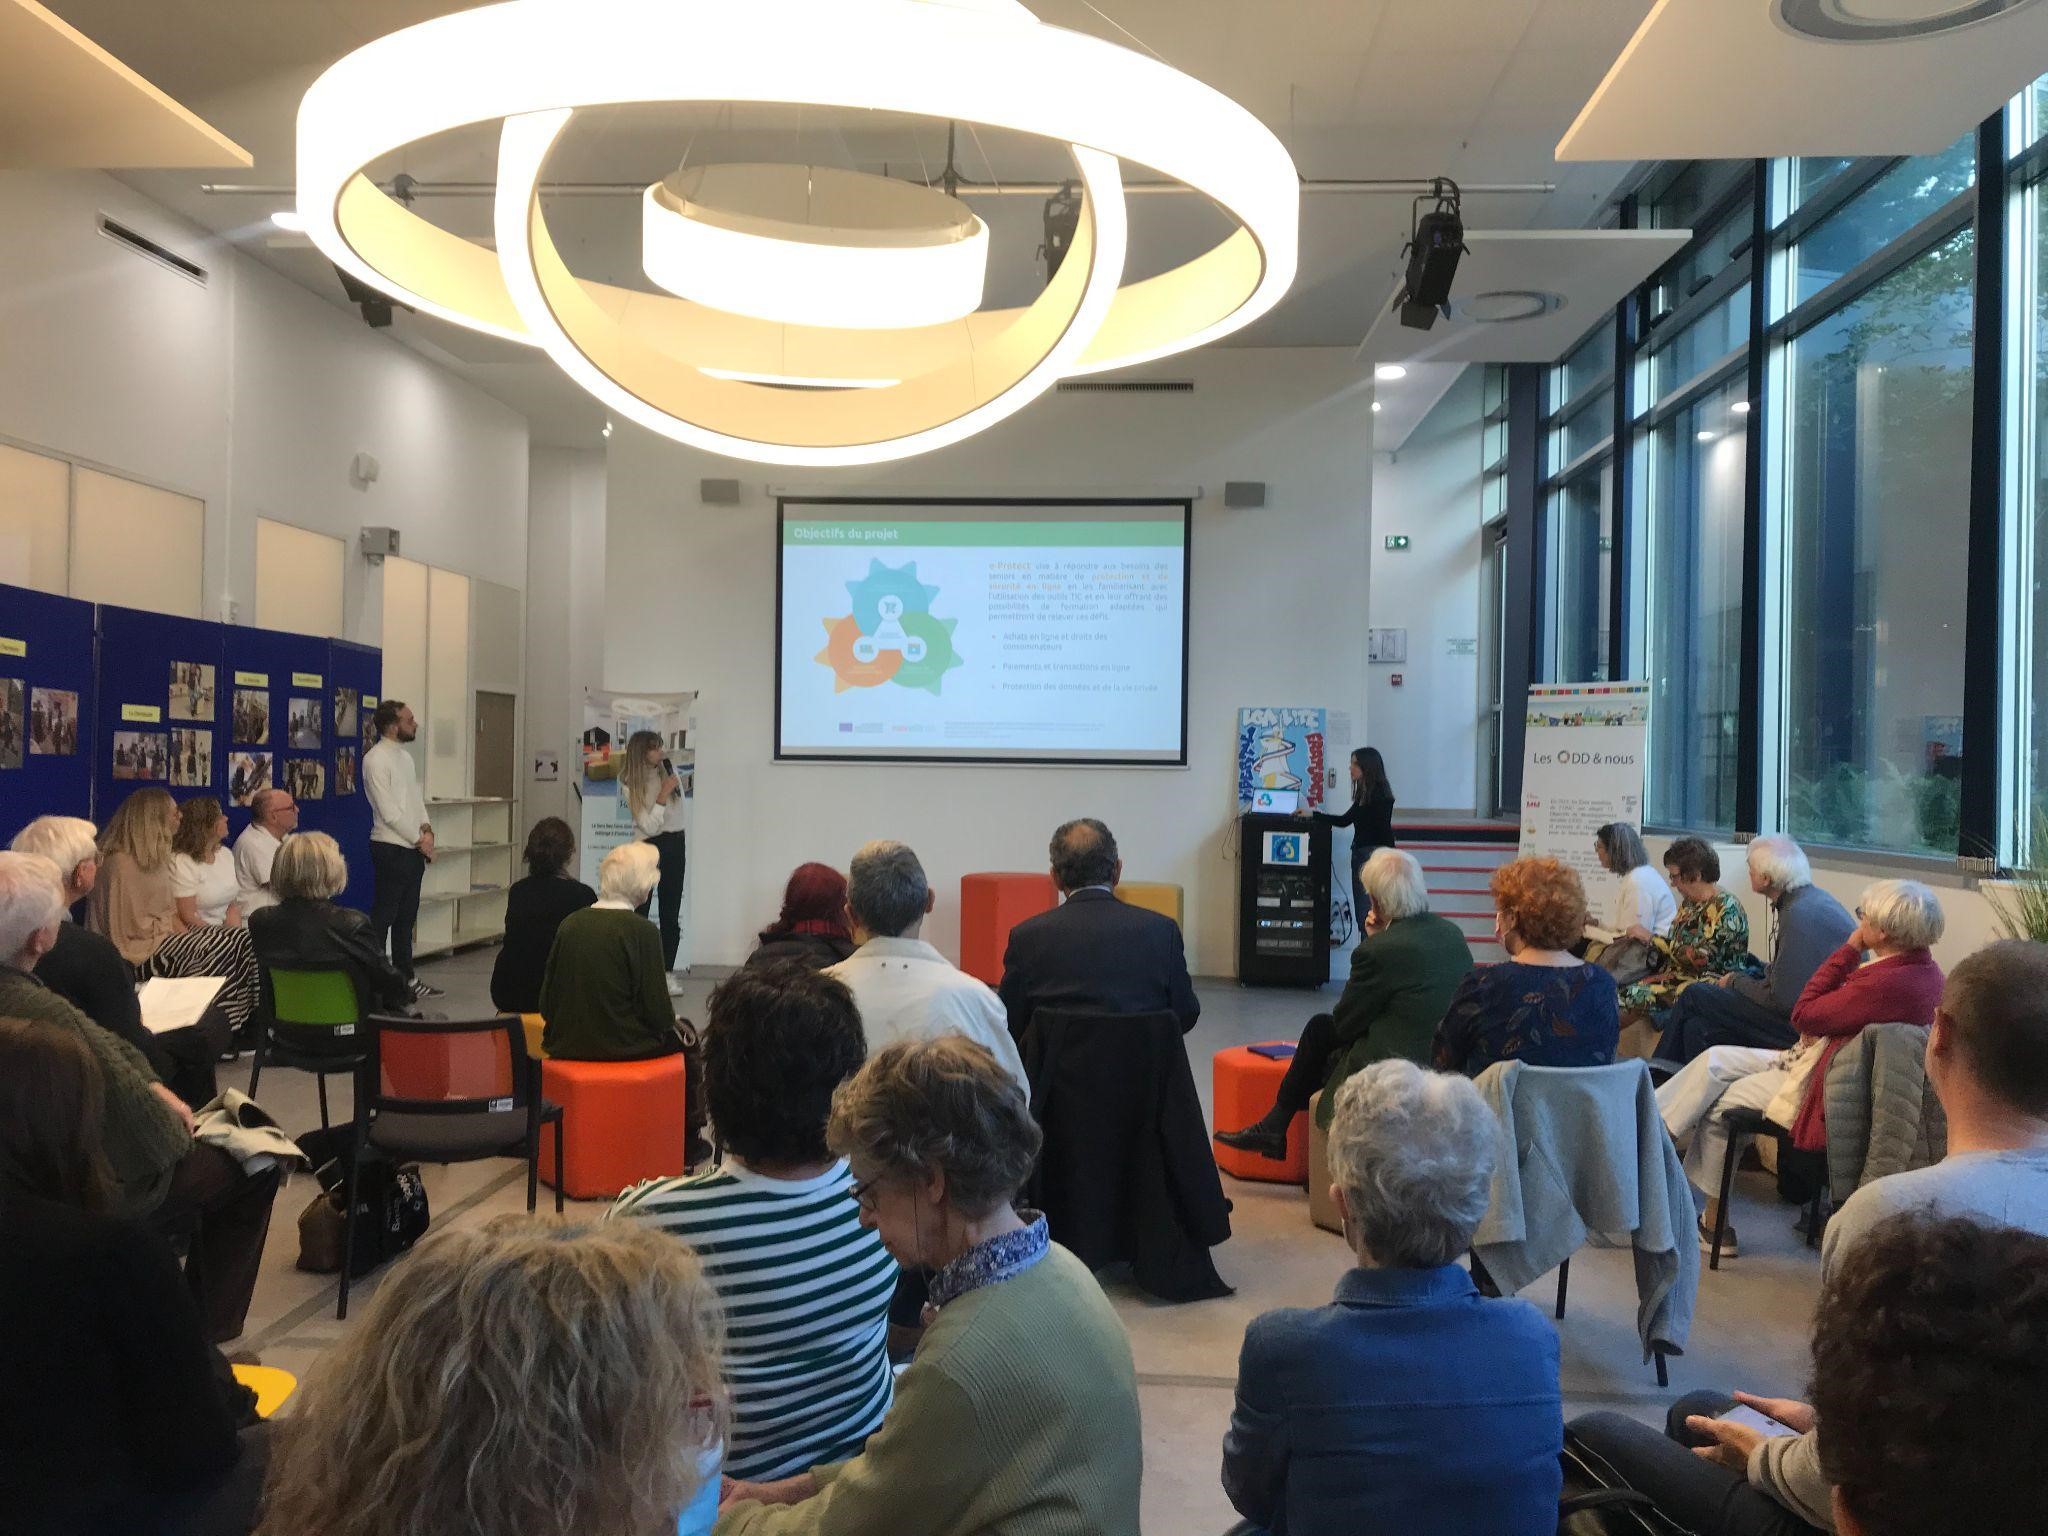 The e-Protect project at the “Semaine Bleue” in Paris for the digital inclusion of seniors